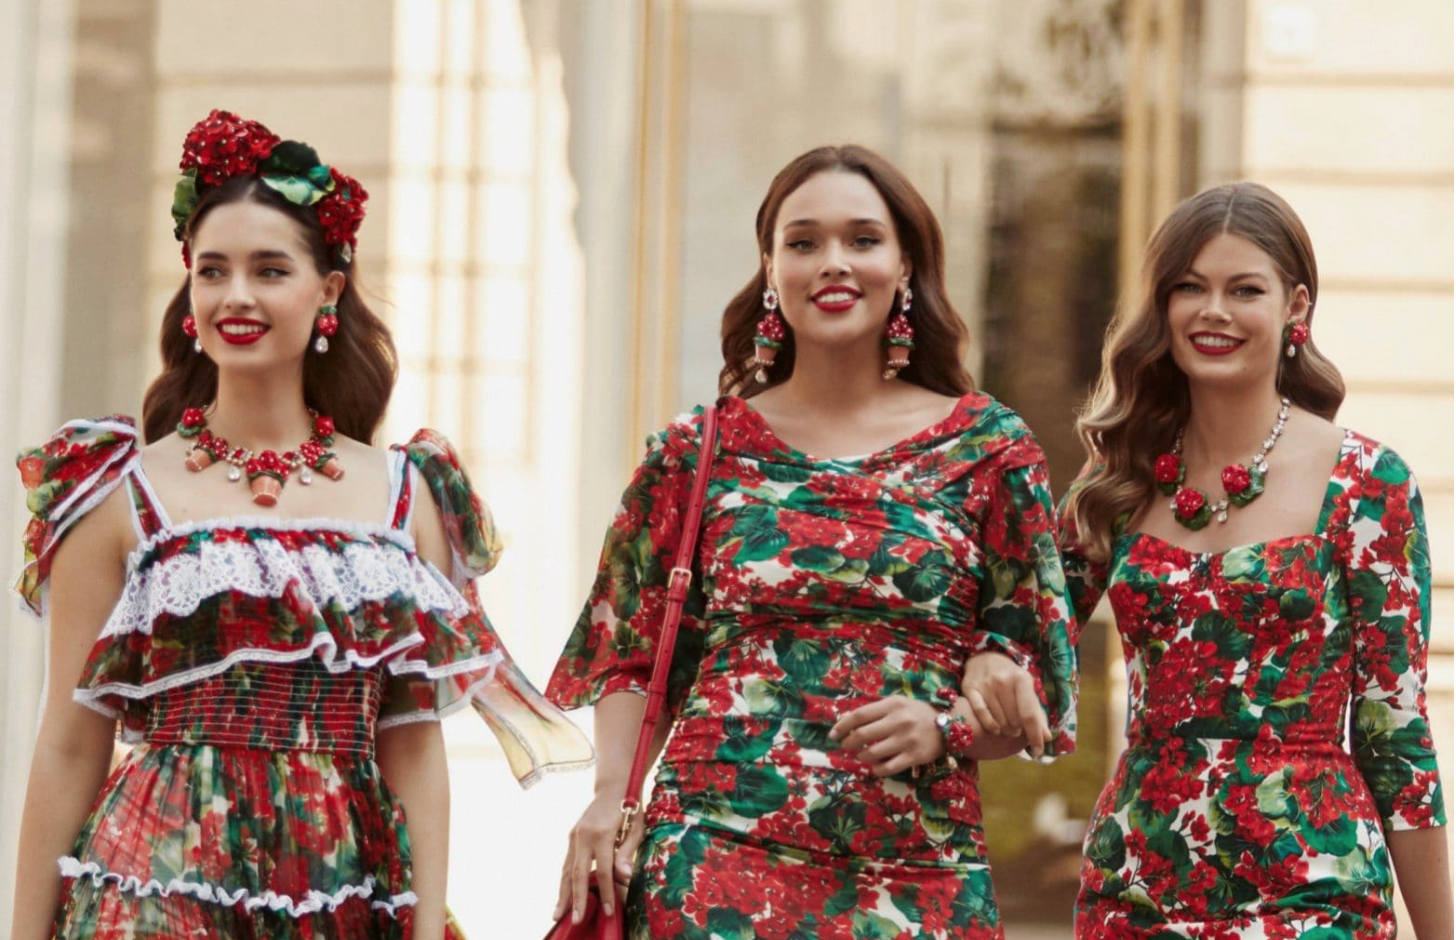 Three years after ad controversy, D&G is still struggling to win back China